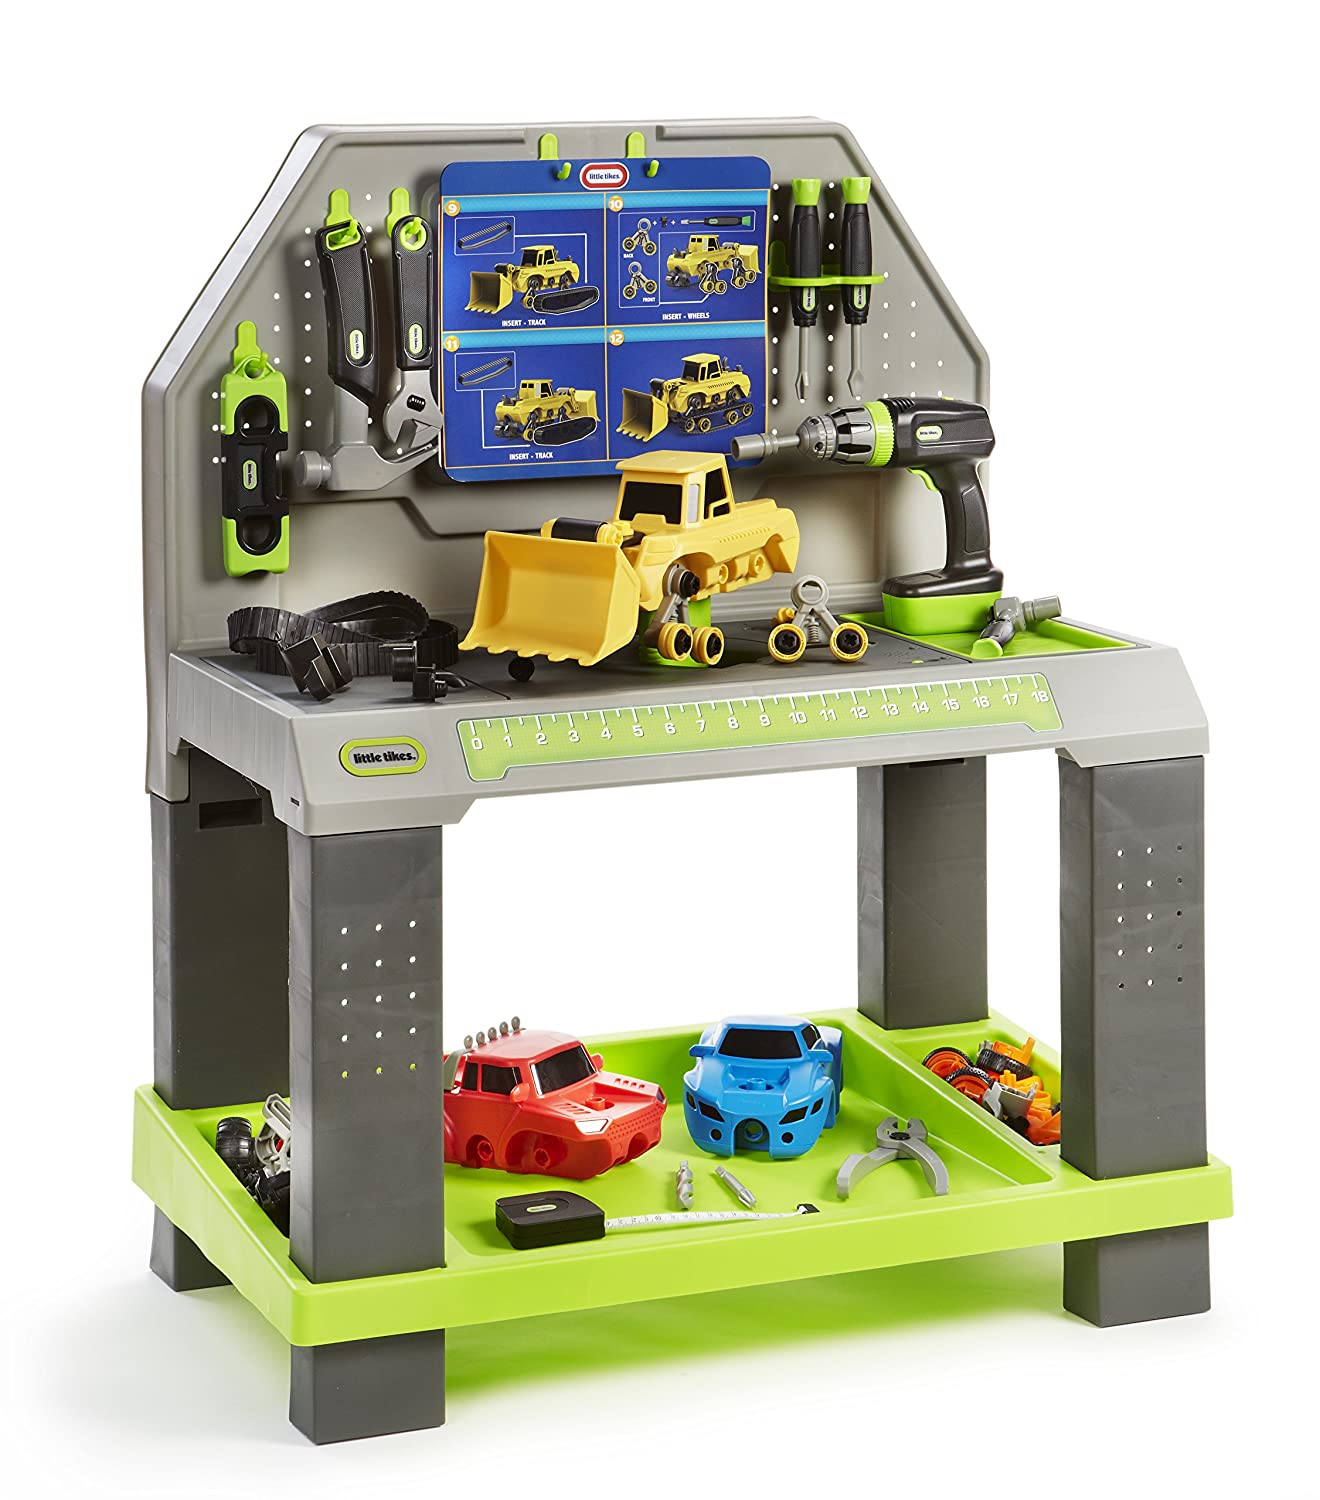 Top 9 Best Kids Toy Tool Bench Reviews in 2022 7